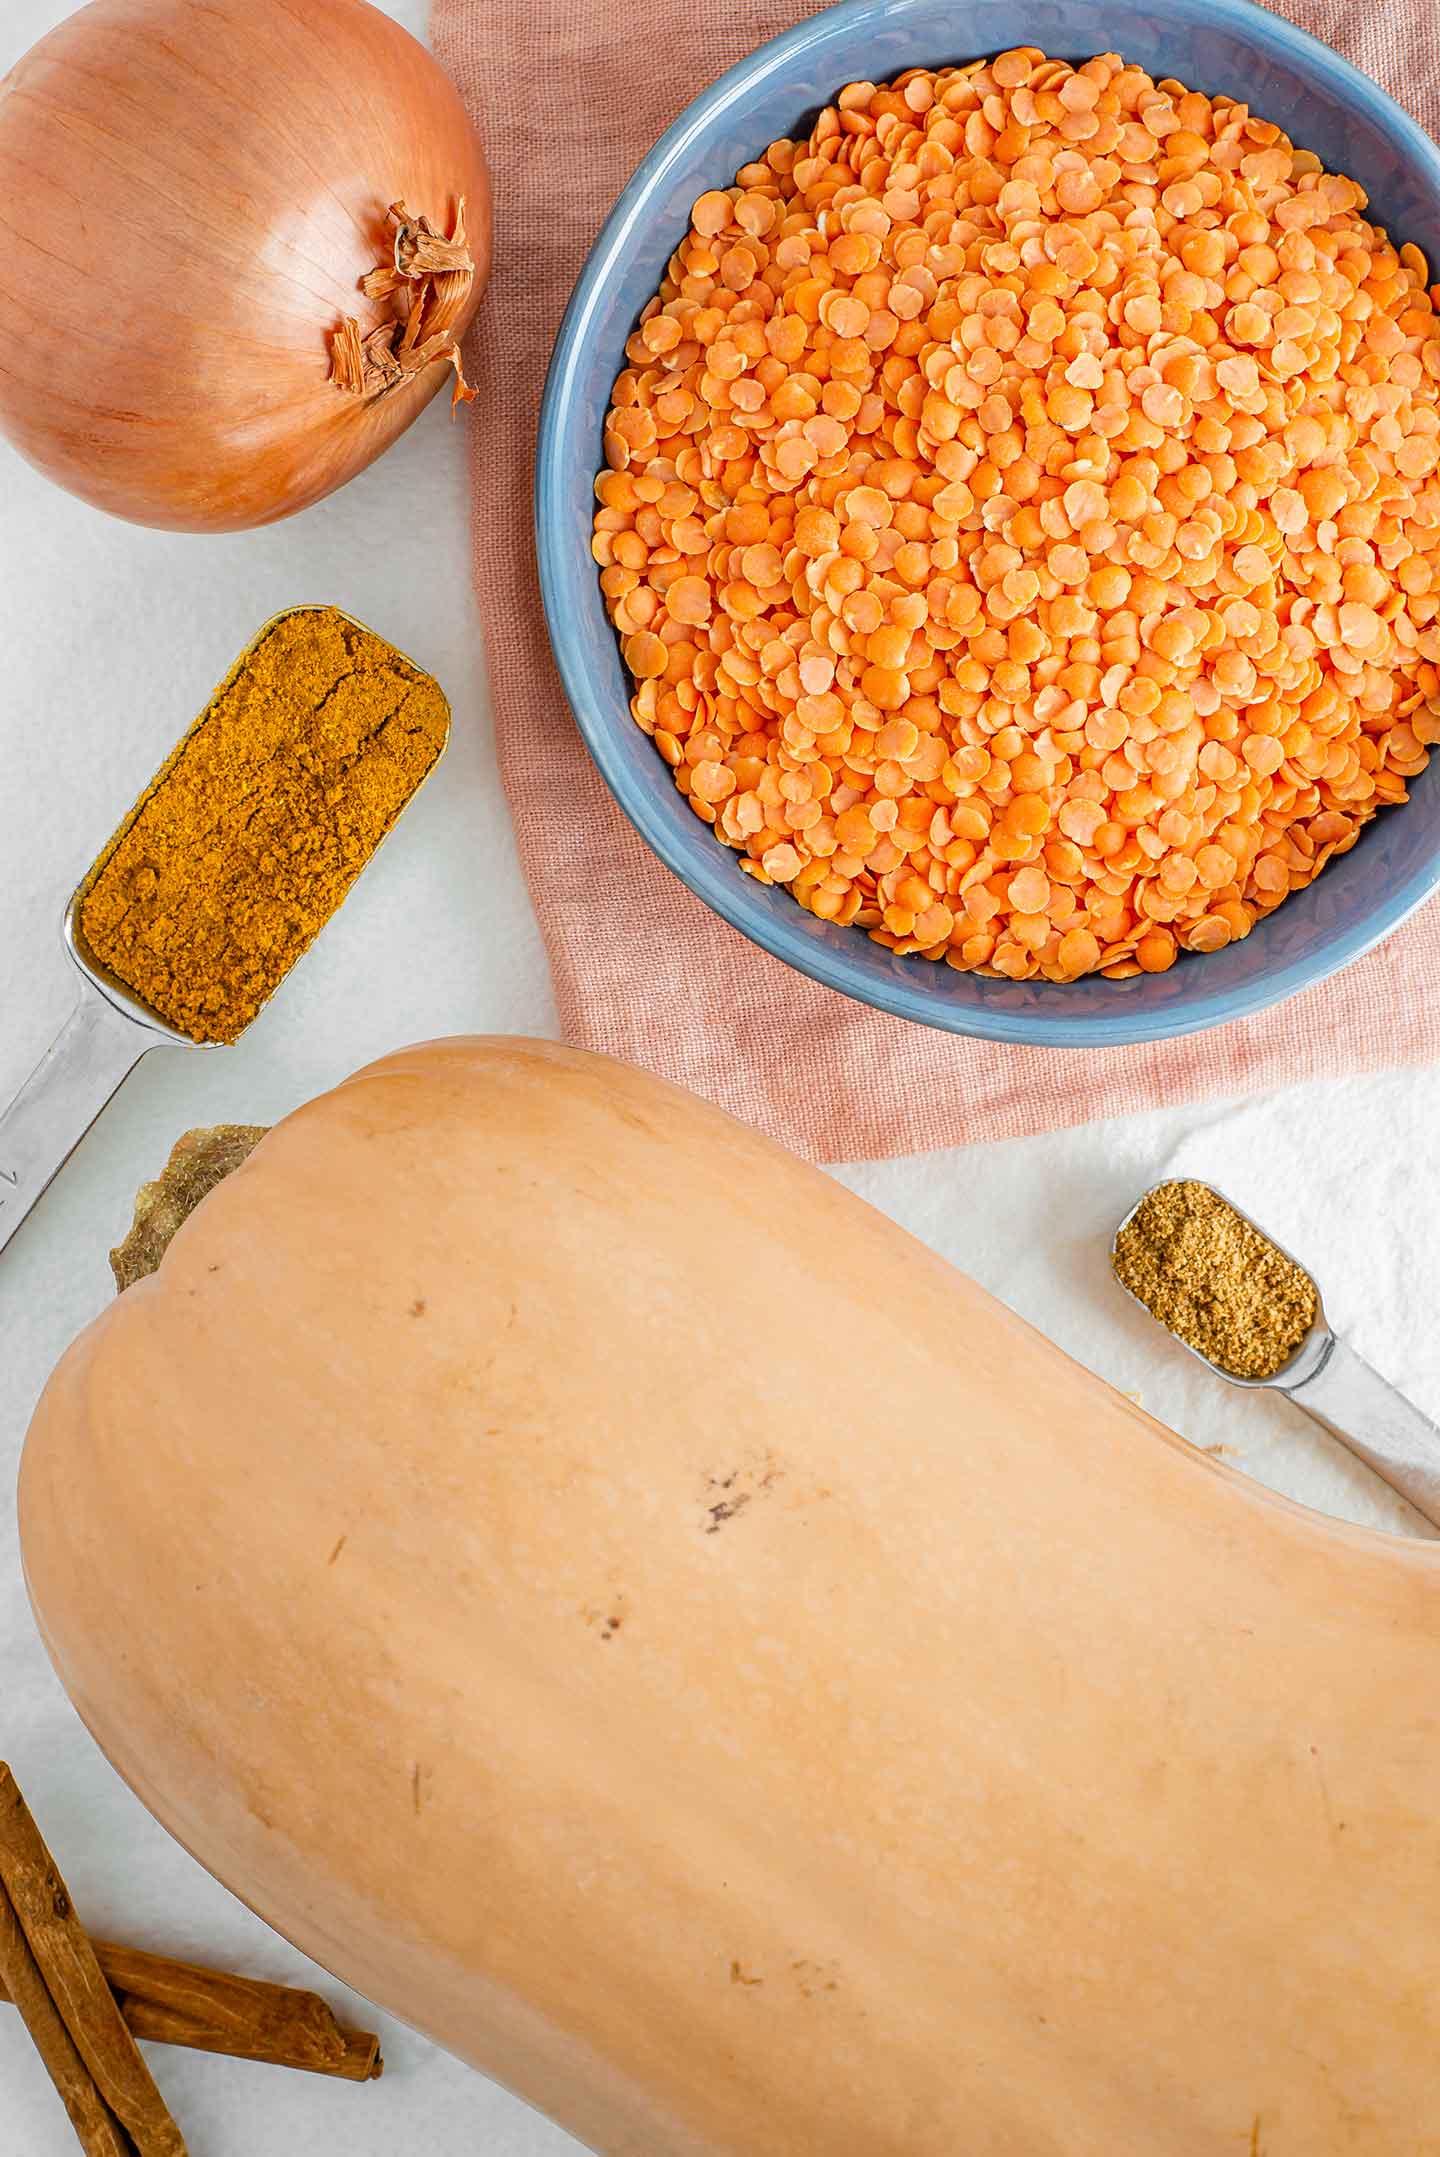 Top down view of a butternut squash, a bowl of dry red lentils, an onion and some seasonings in measuring spoons.